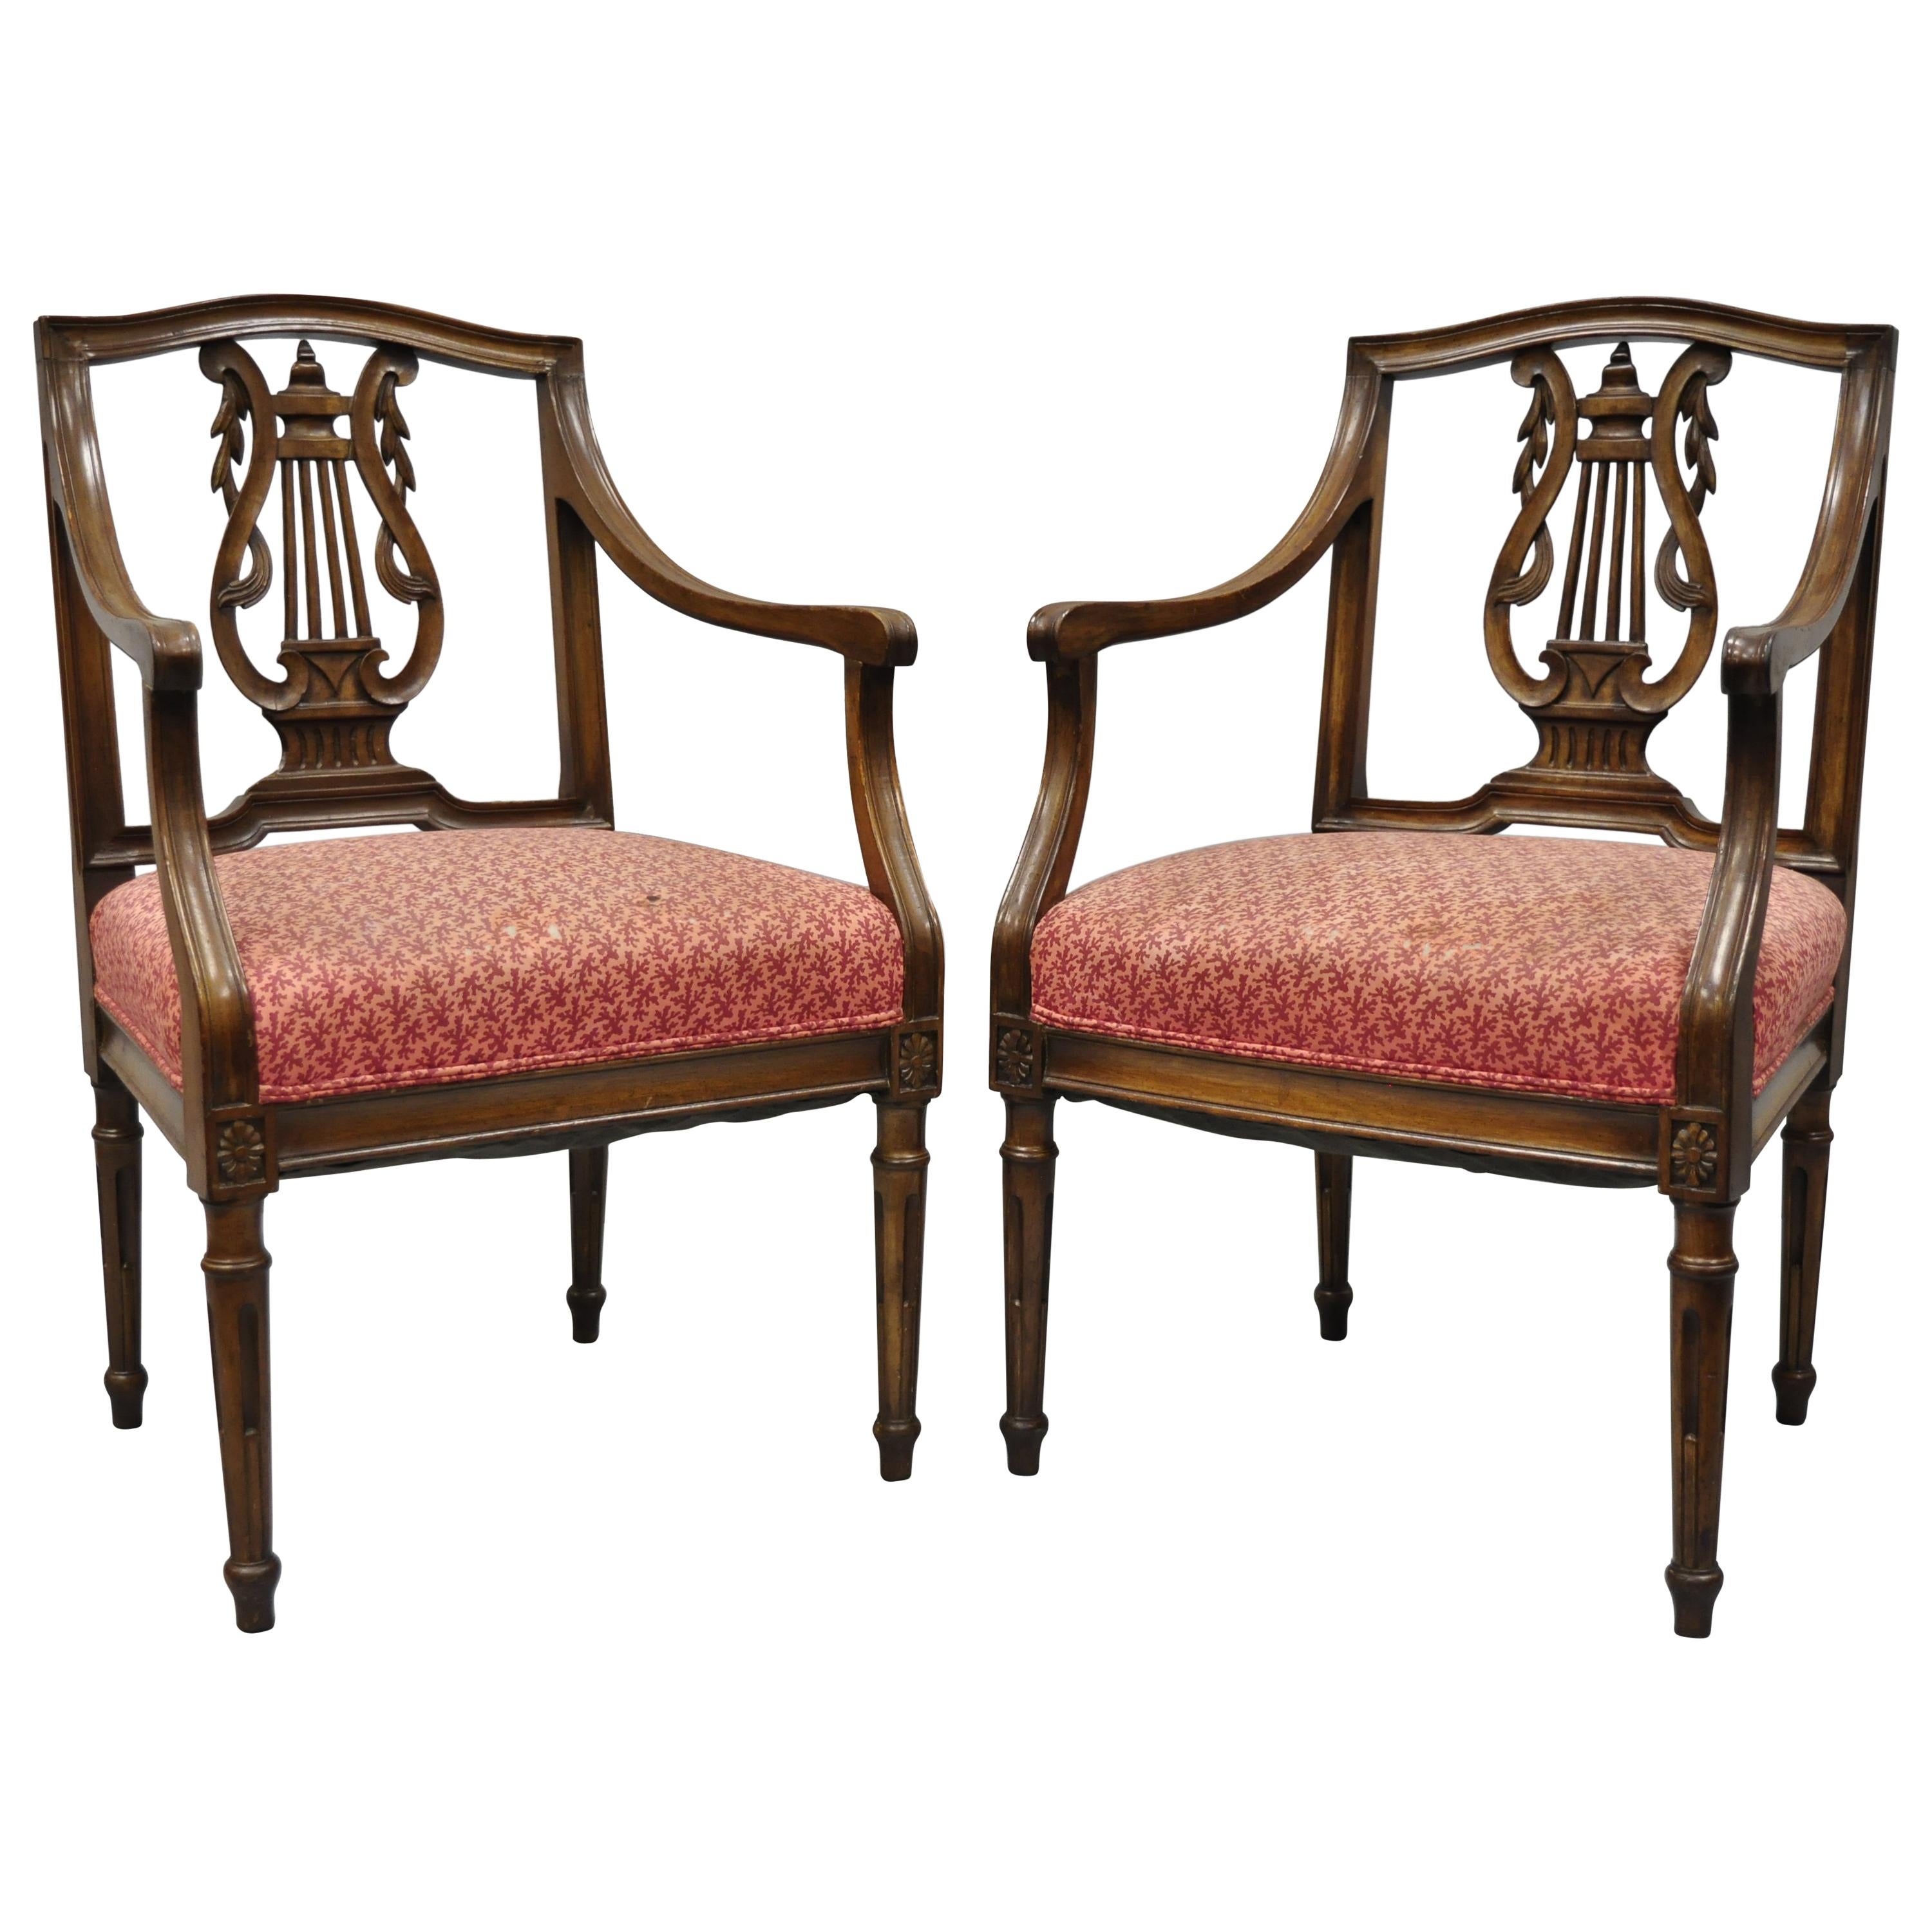 Pair of Antique Louis XVI French Style Lyre Back Italian Armchairs